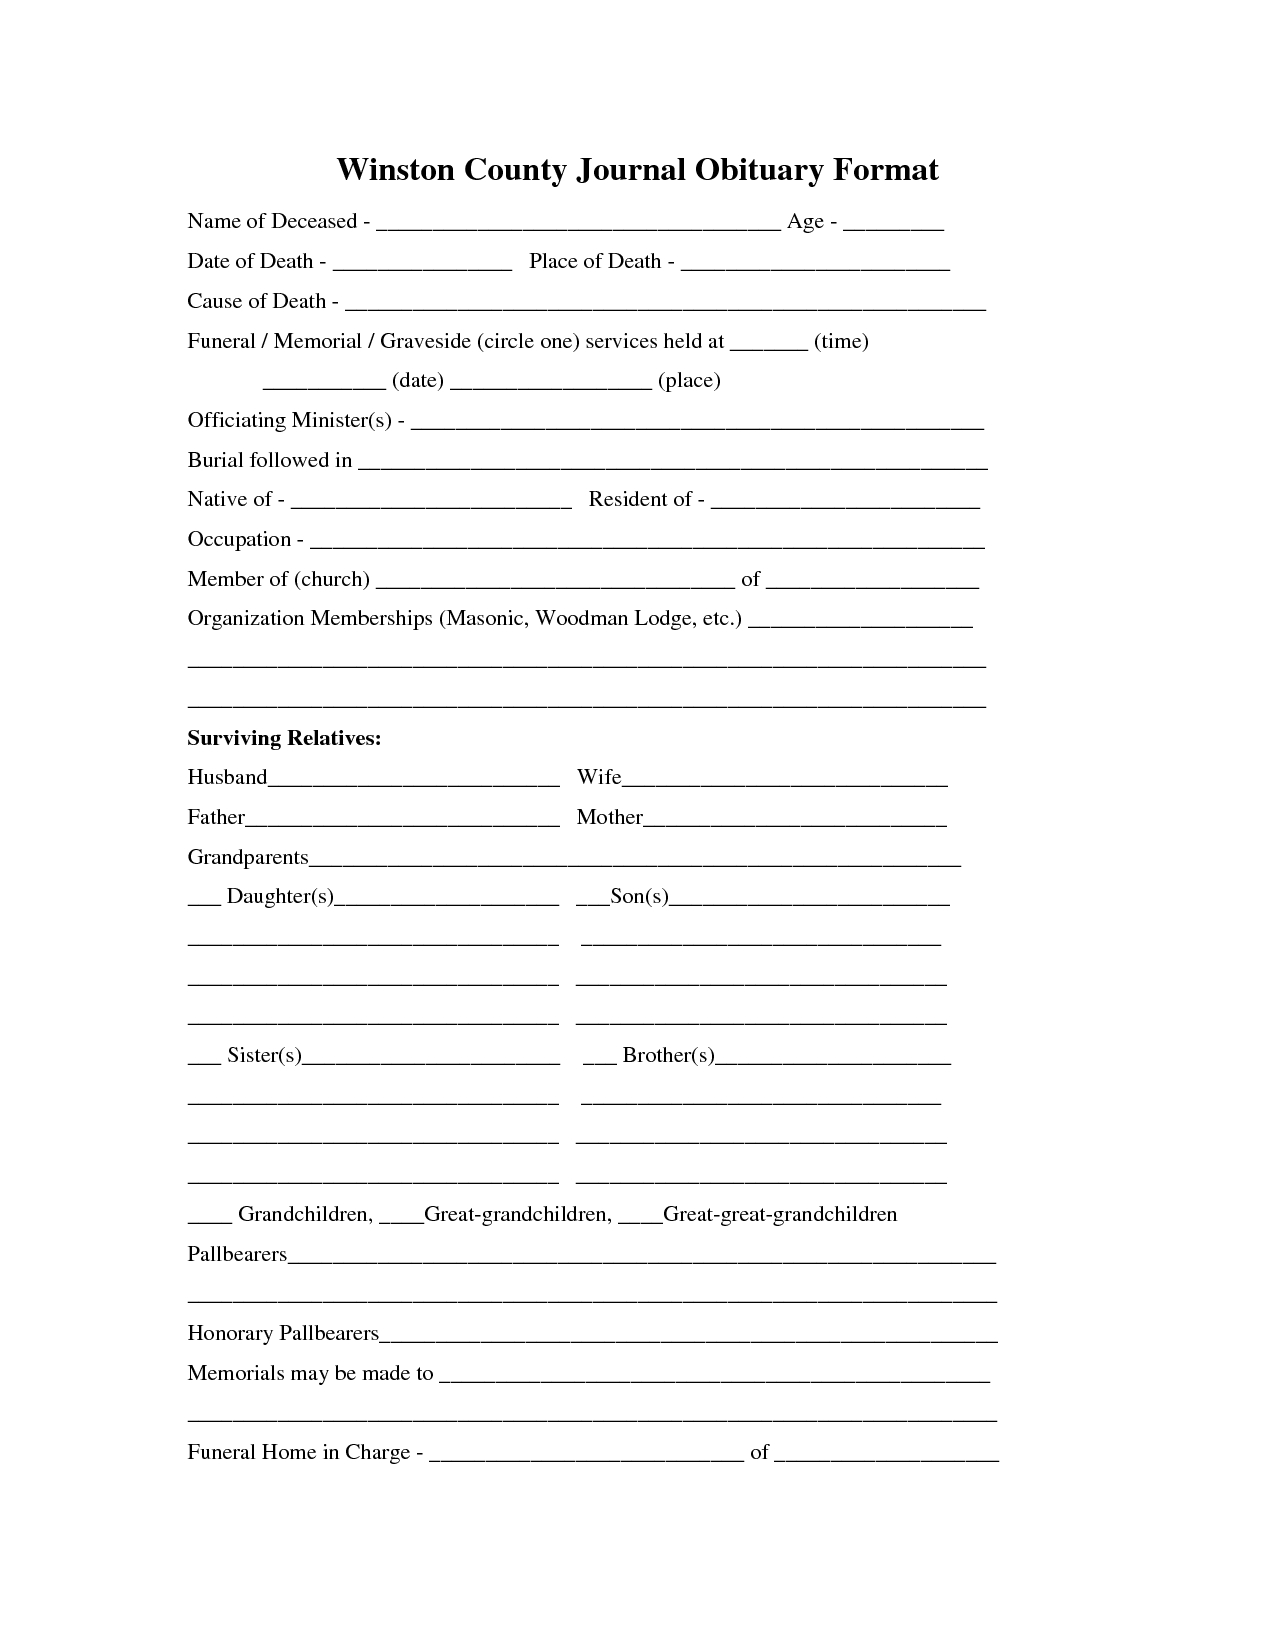 Printable Obituary Template | Fill In The Blank Obituary Inside Fill In The Blank Obituary Template